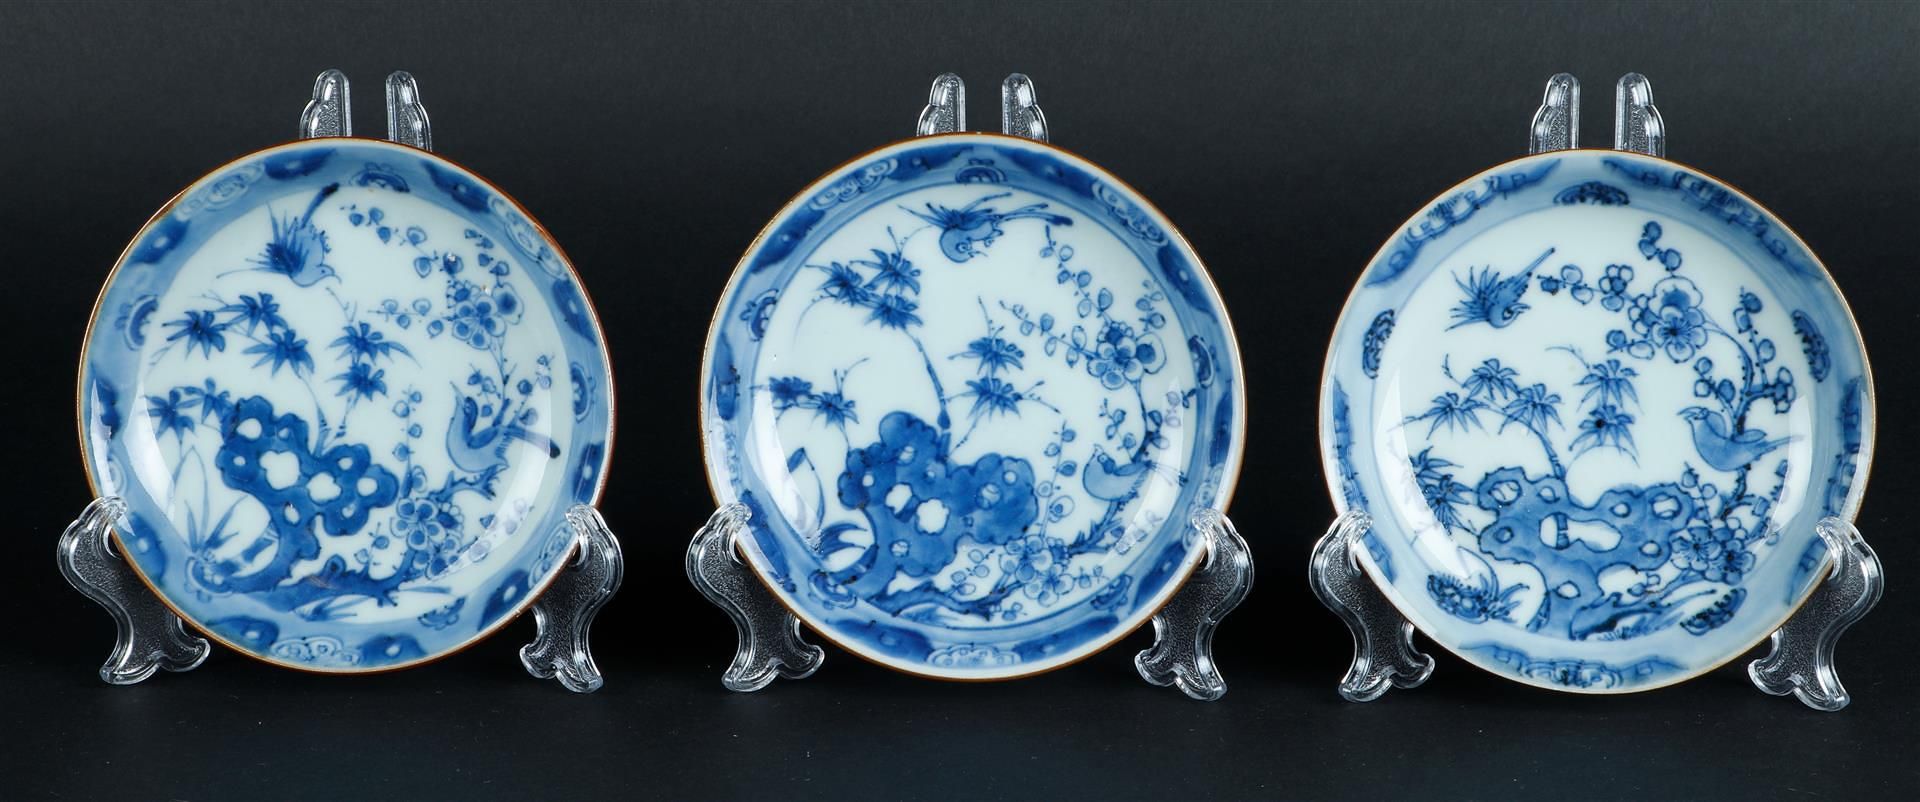 Three porcelain plates with floral decoration on rock with two birds, with clouded outer rim and cap